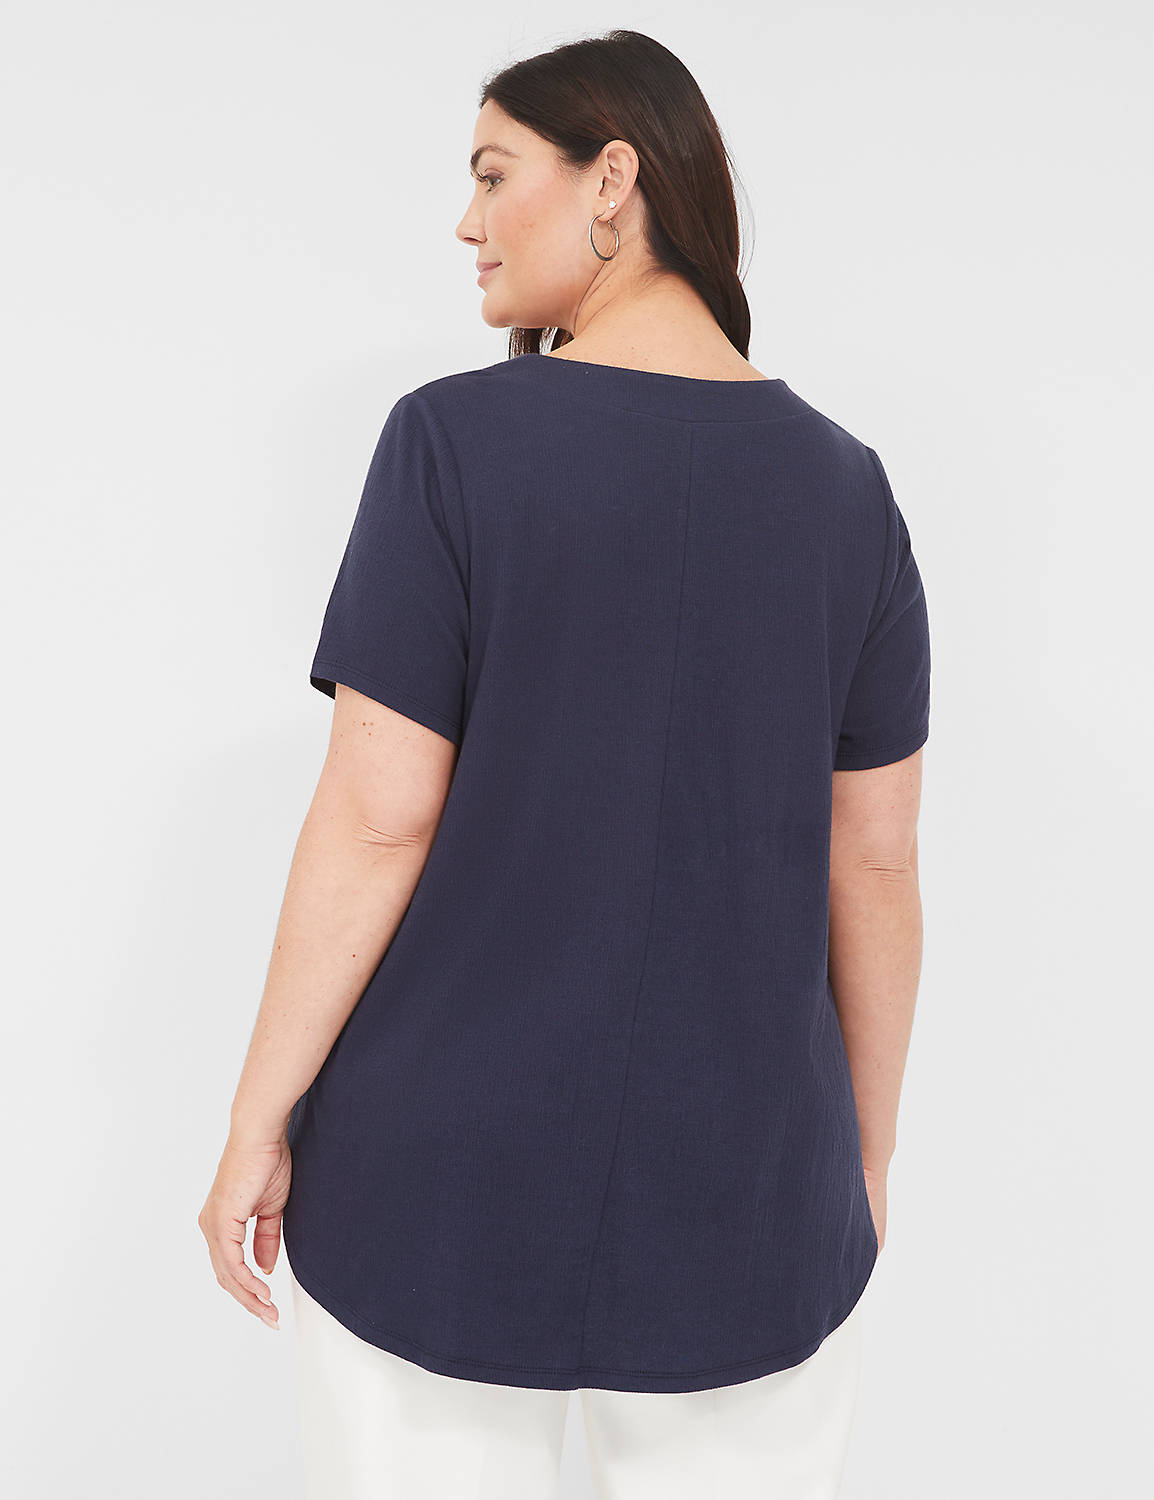 Casual Classic Short Sleeve Vneck T Product Image 2